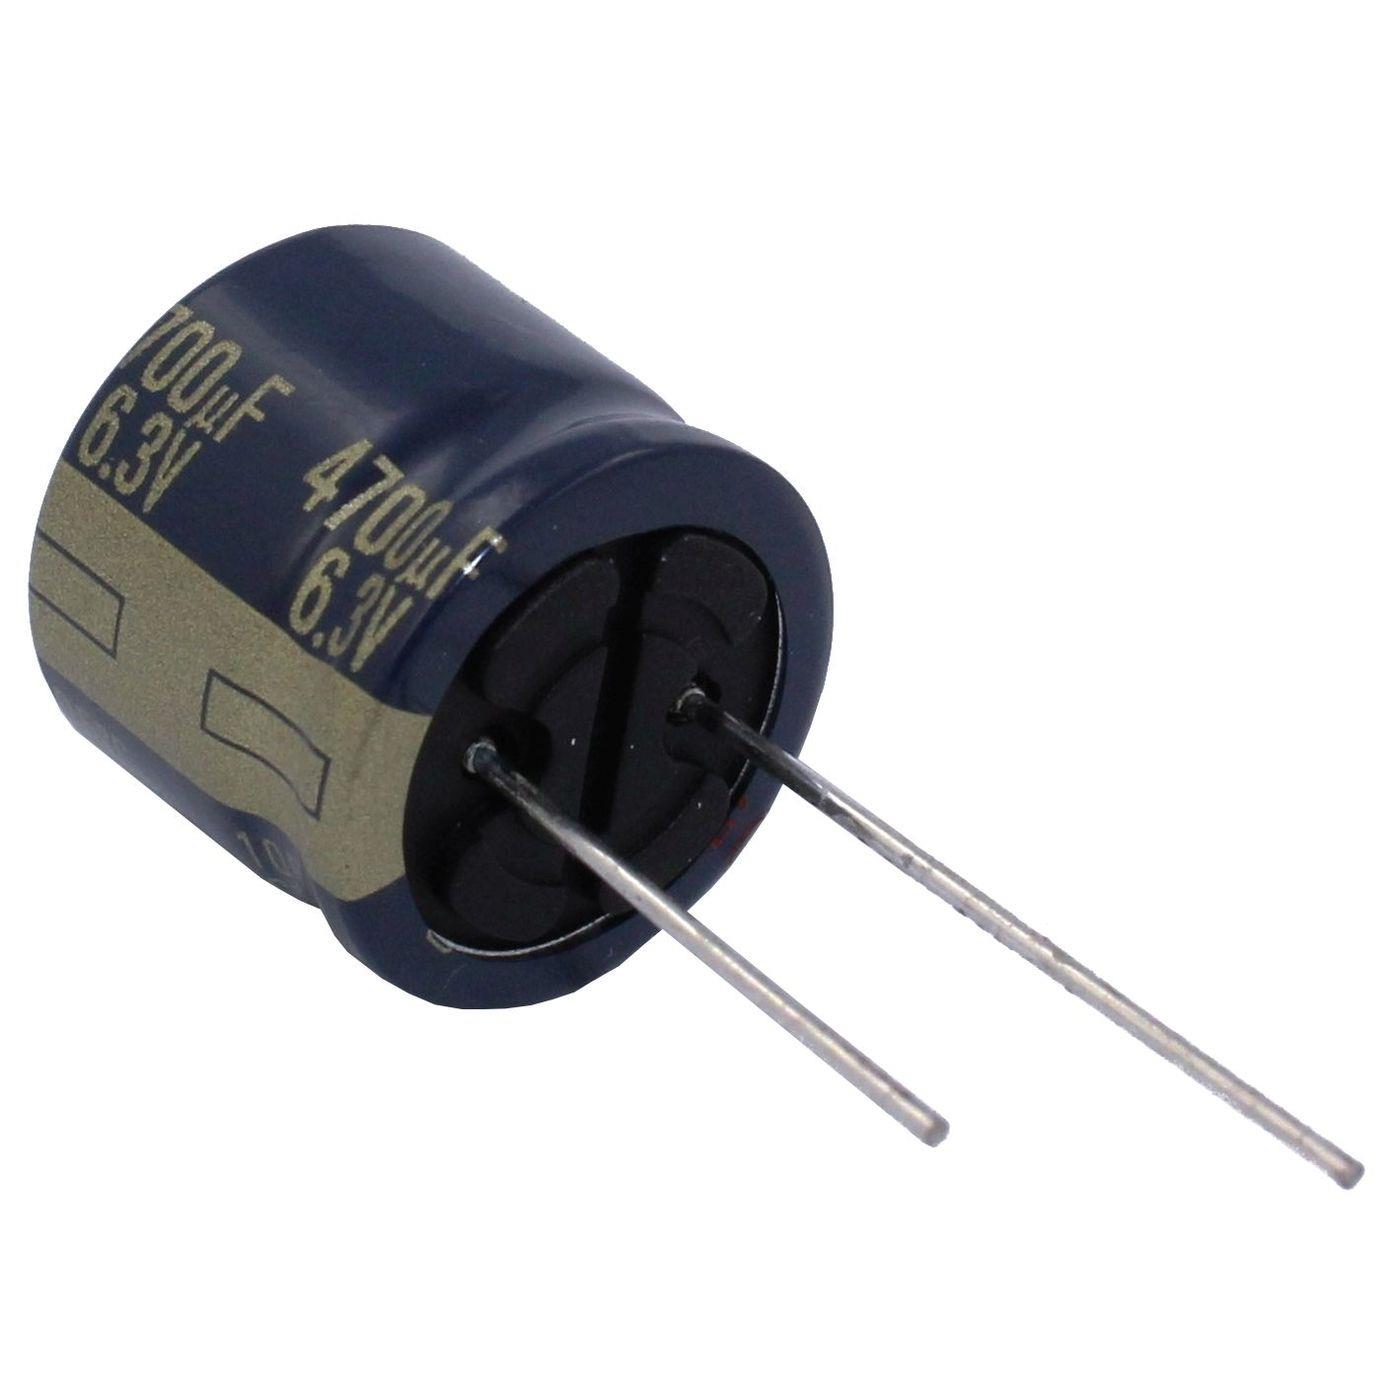 Electrolytic capacitor Radial 4700µF 6,3V 105°C EEUFK0J472S d18x15mm 4700uF